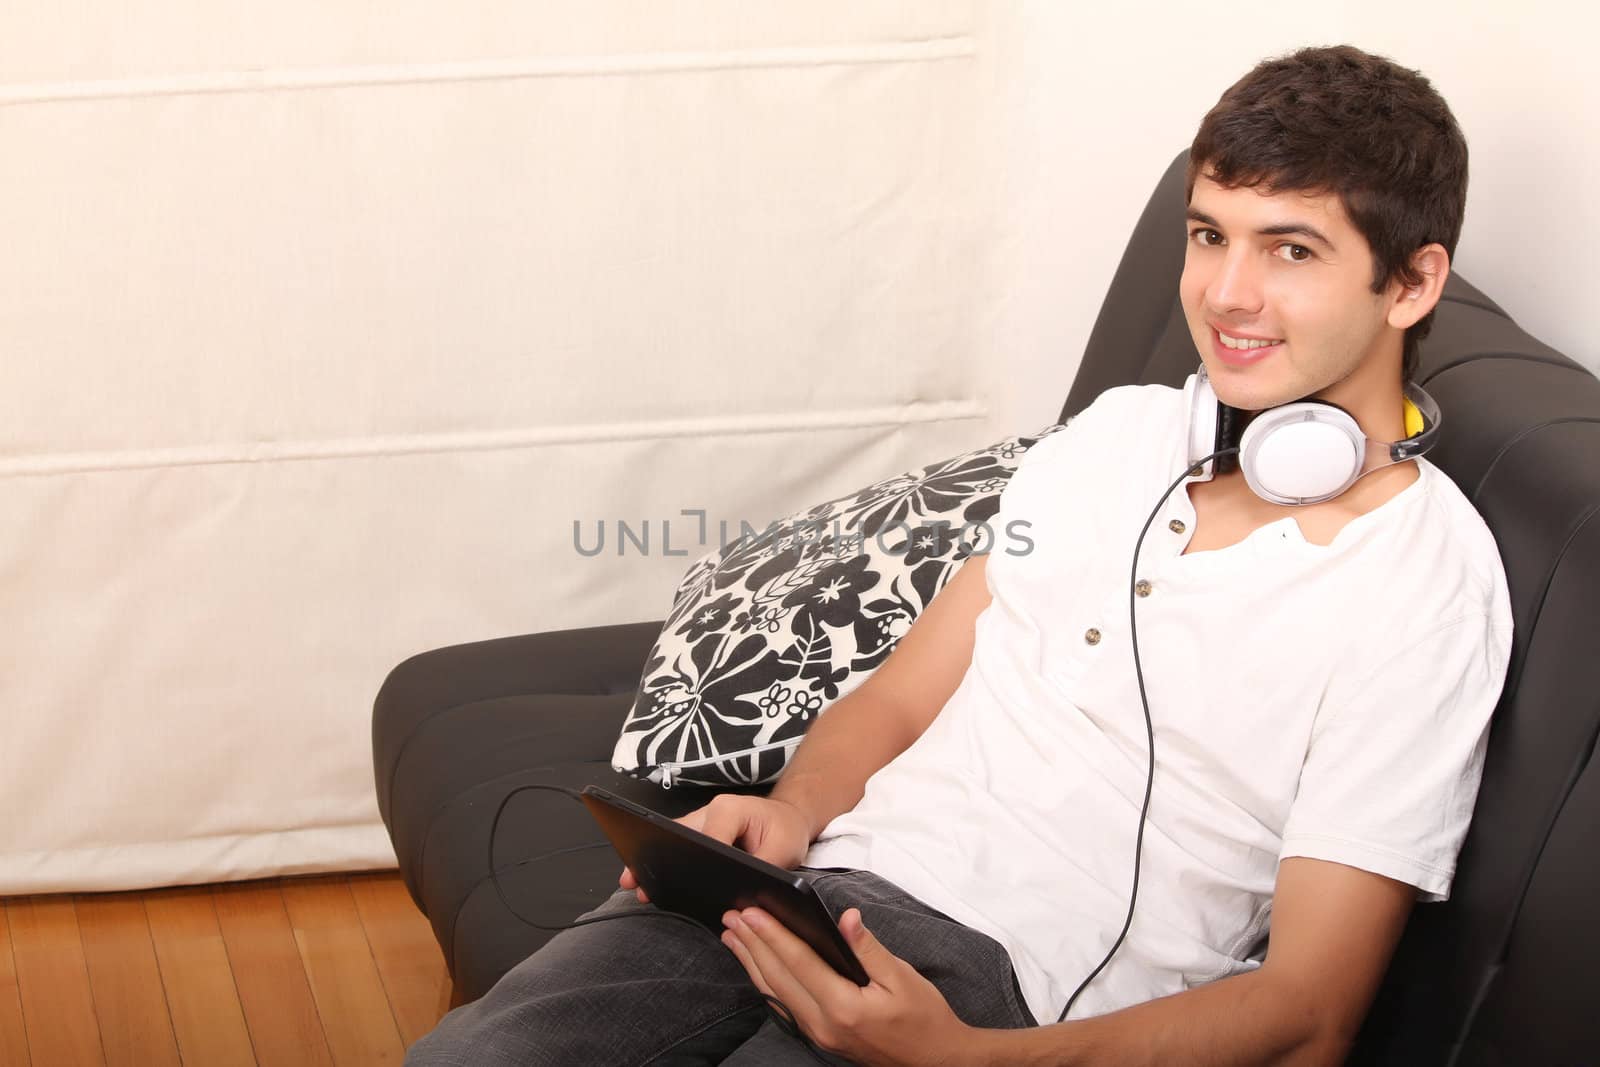 A young, latin man with a Tablet PC and Headphones on the Sofa
